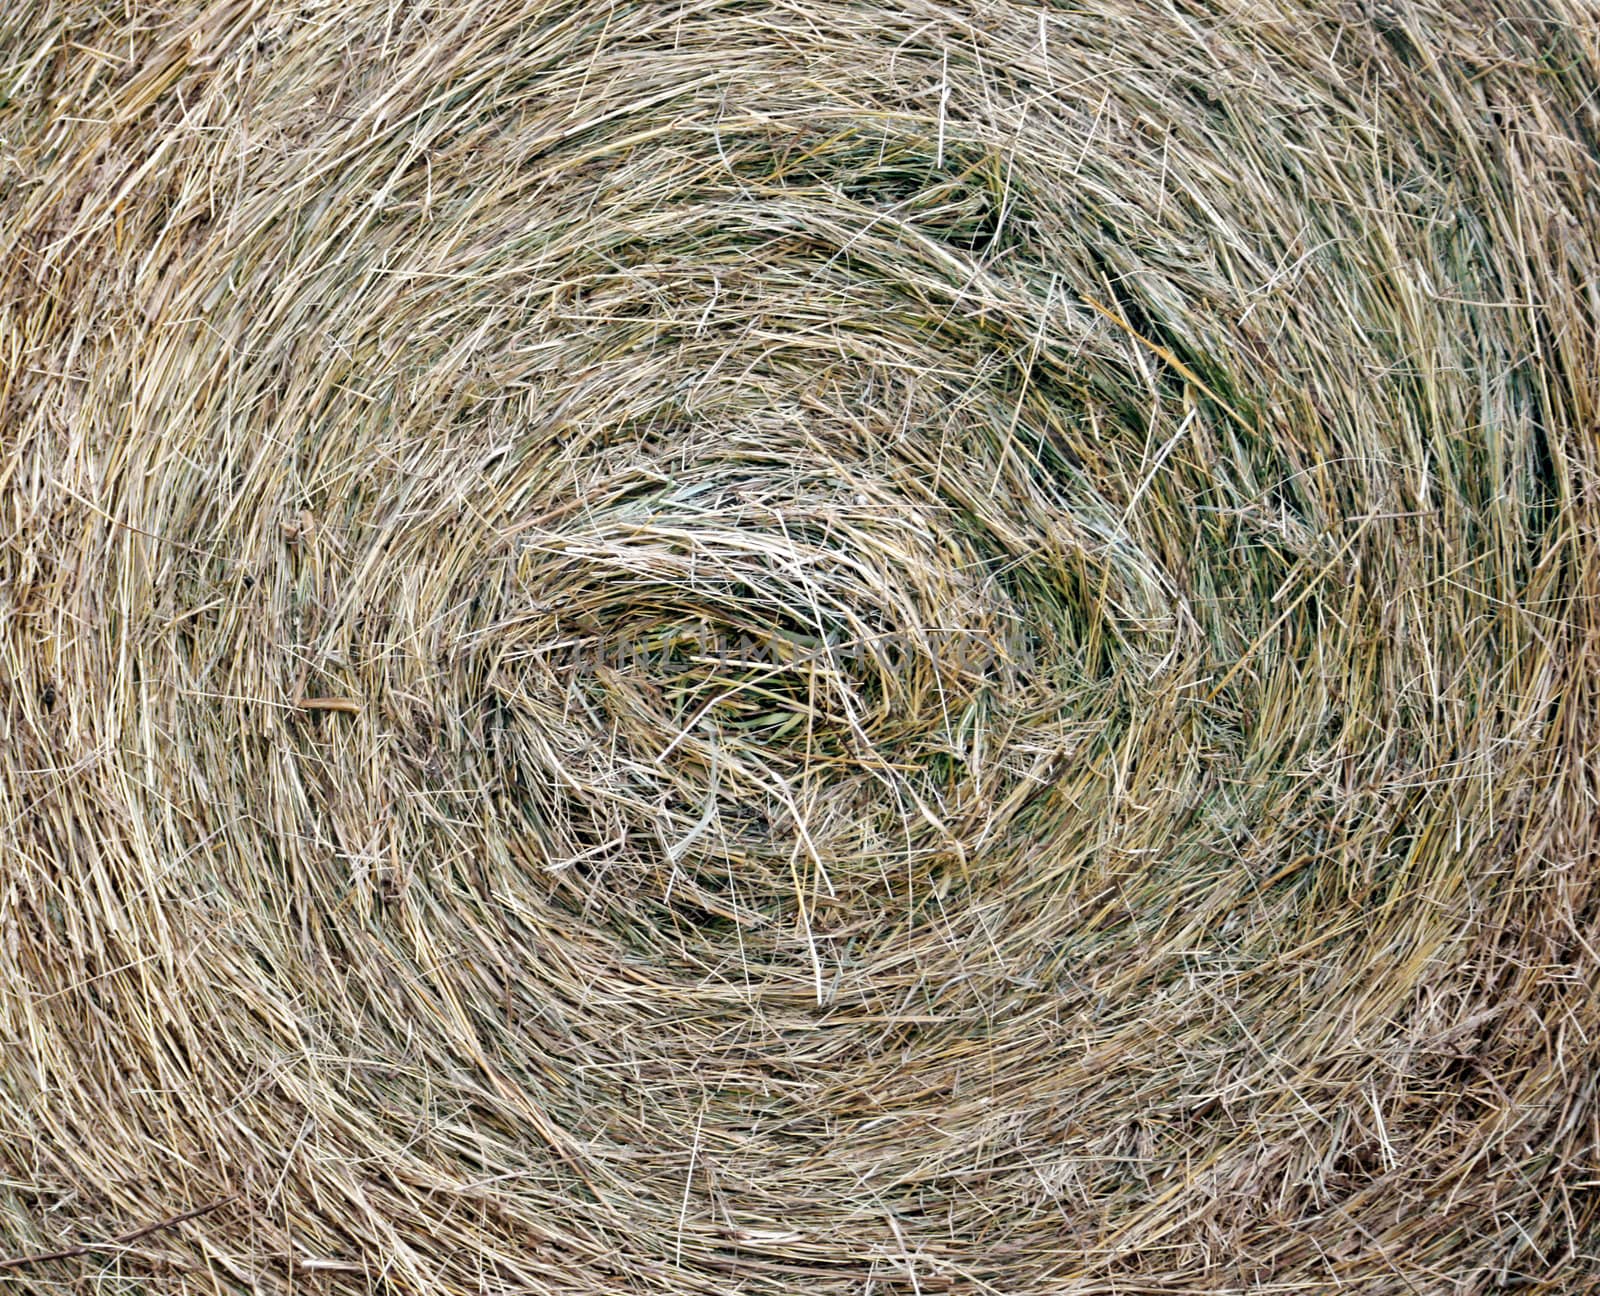 This image shows a closeup view from bale of straw